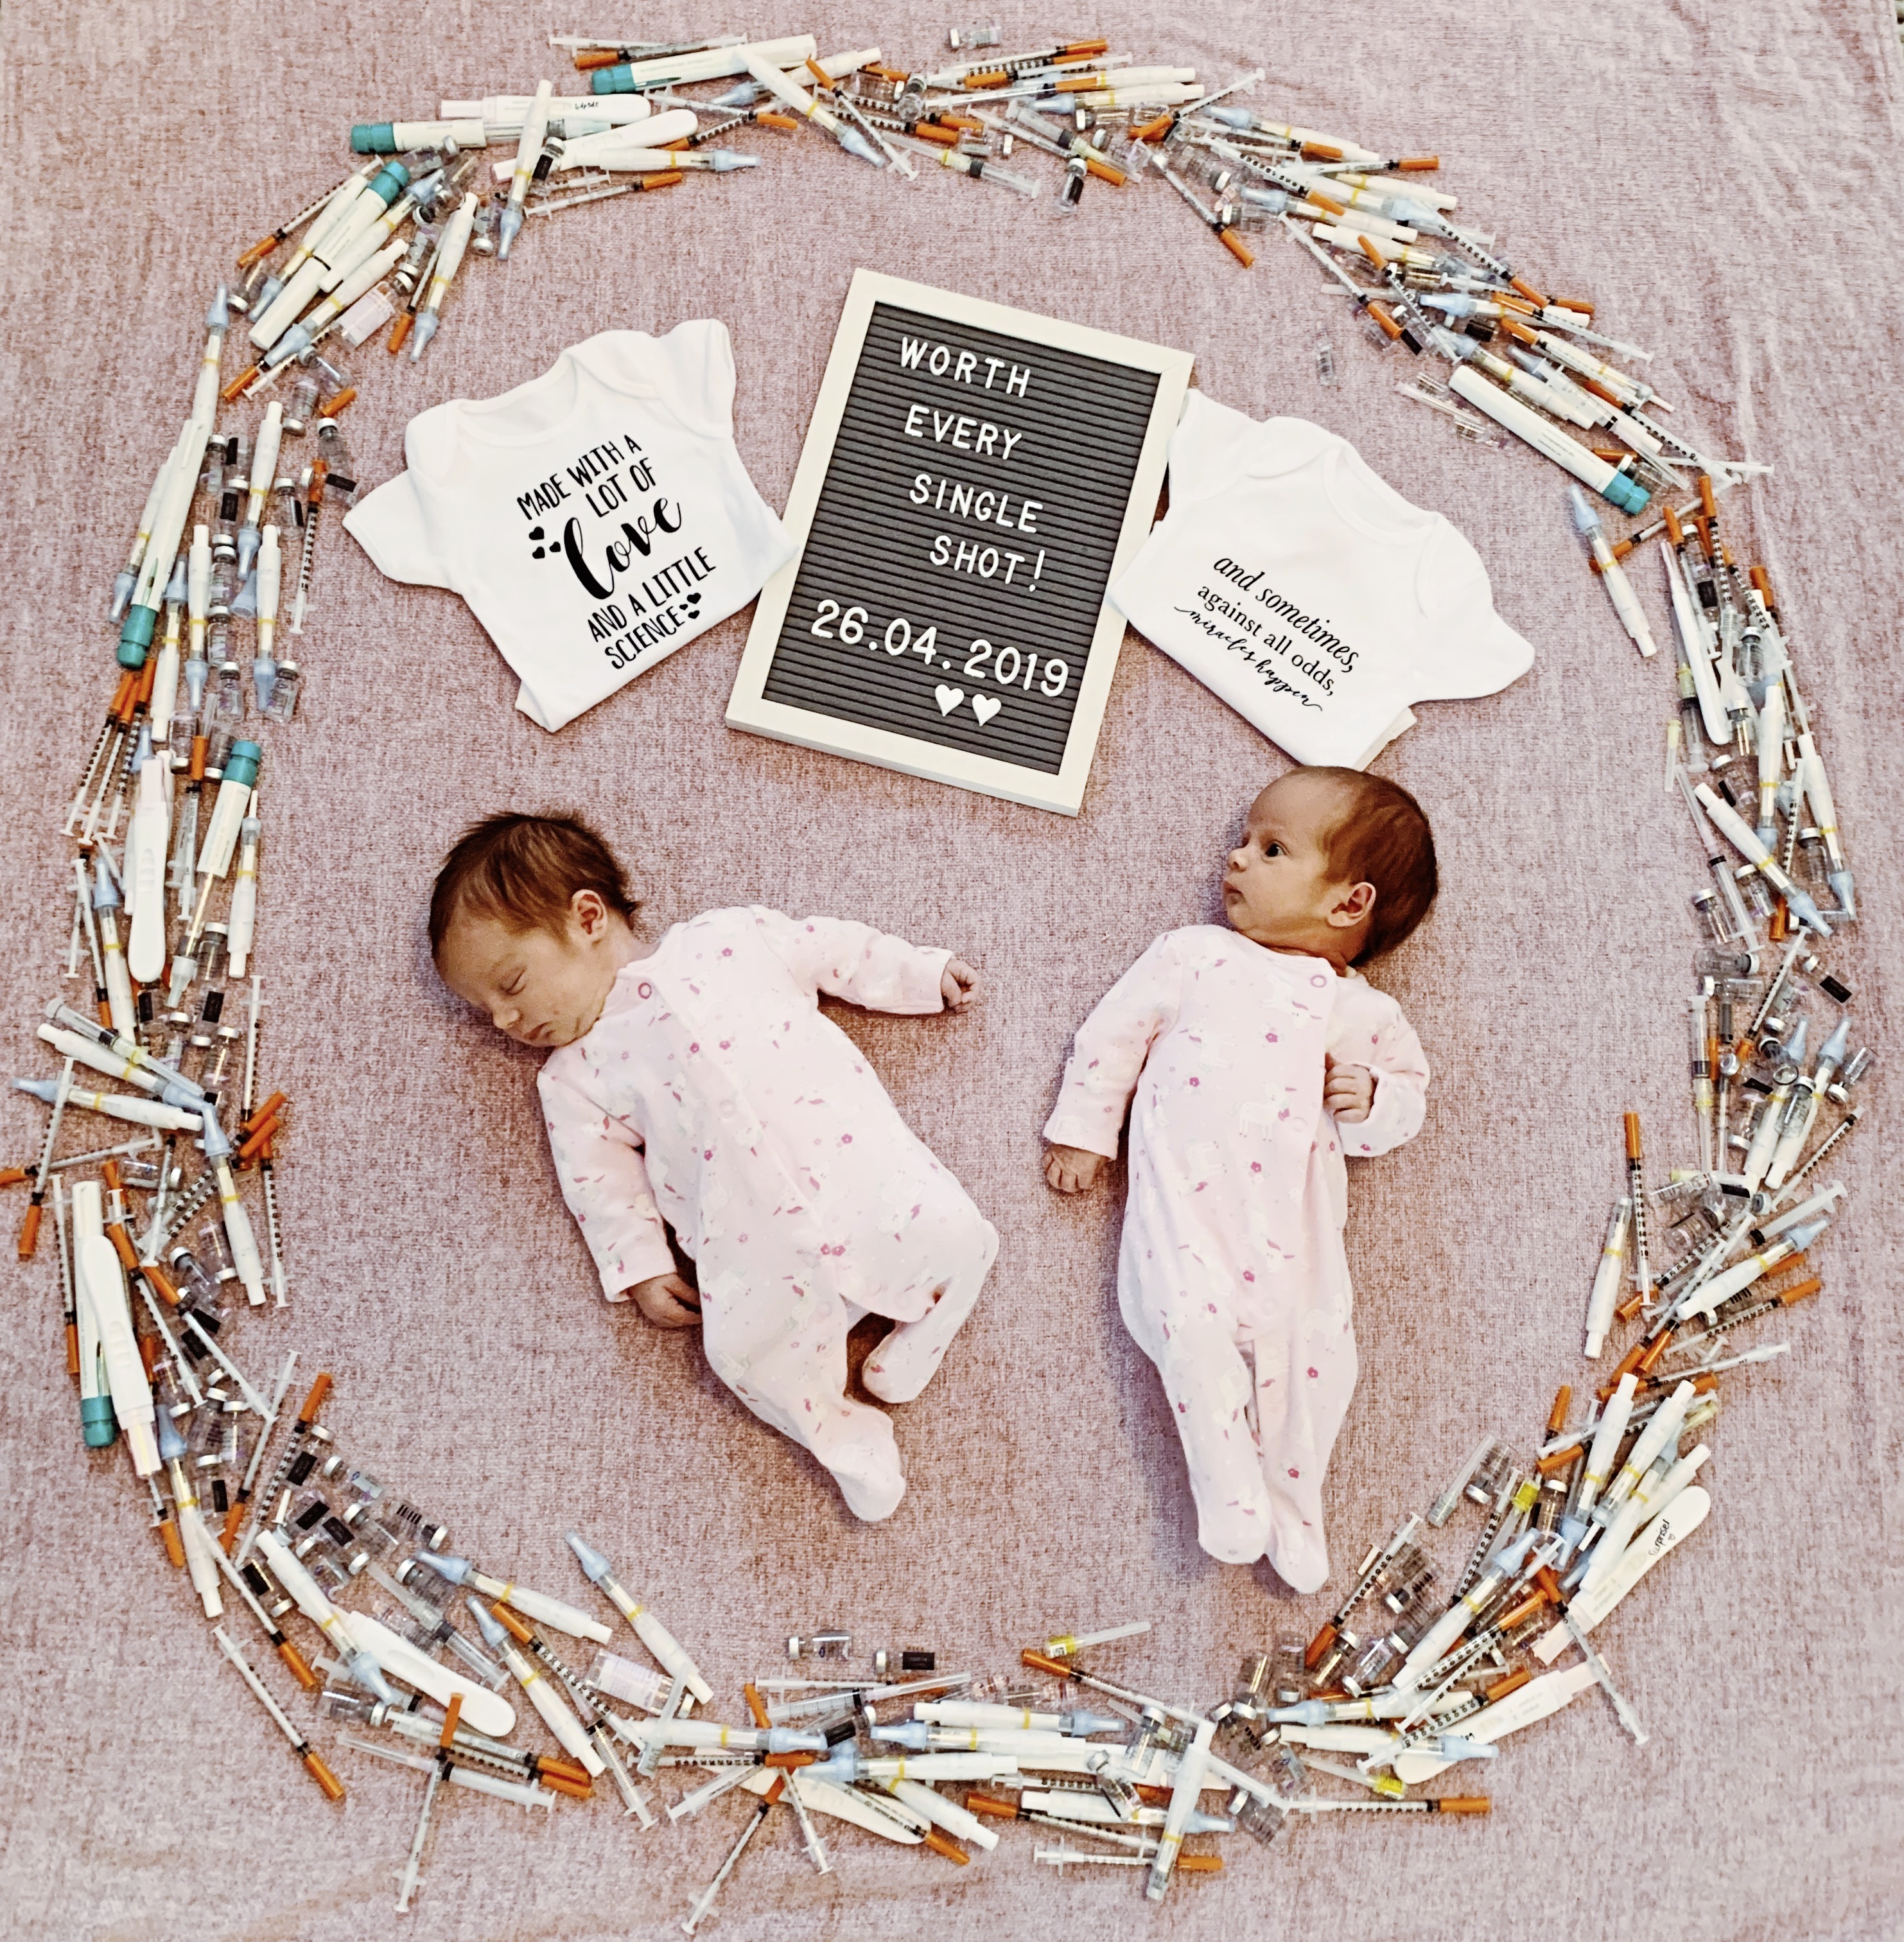 Leah and Kevin Black's twins Hallie-Rae and Harlow, who were born on 26 April following seven years of fertility treatment. Around the twins are years' worth of injections and drugs Leah had to take during her treatment 